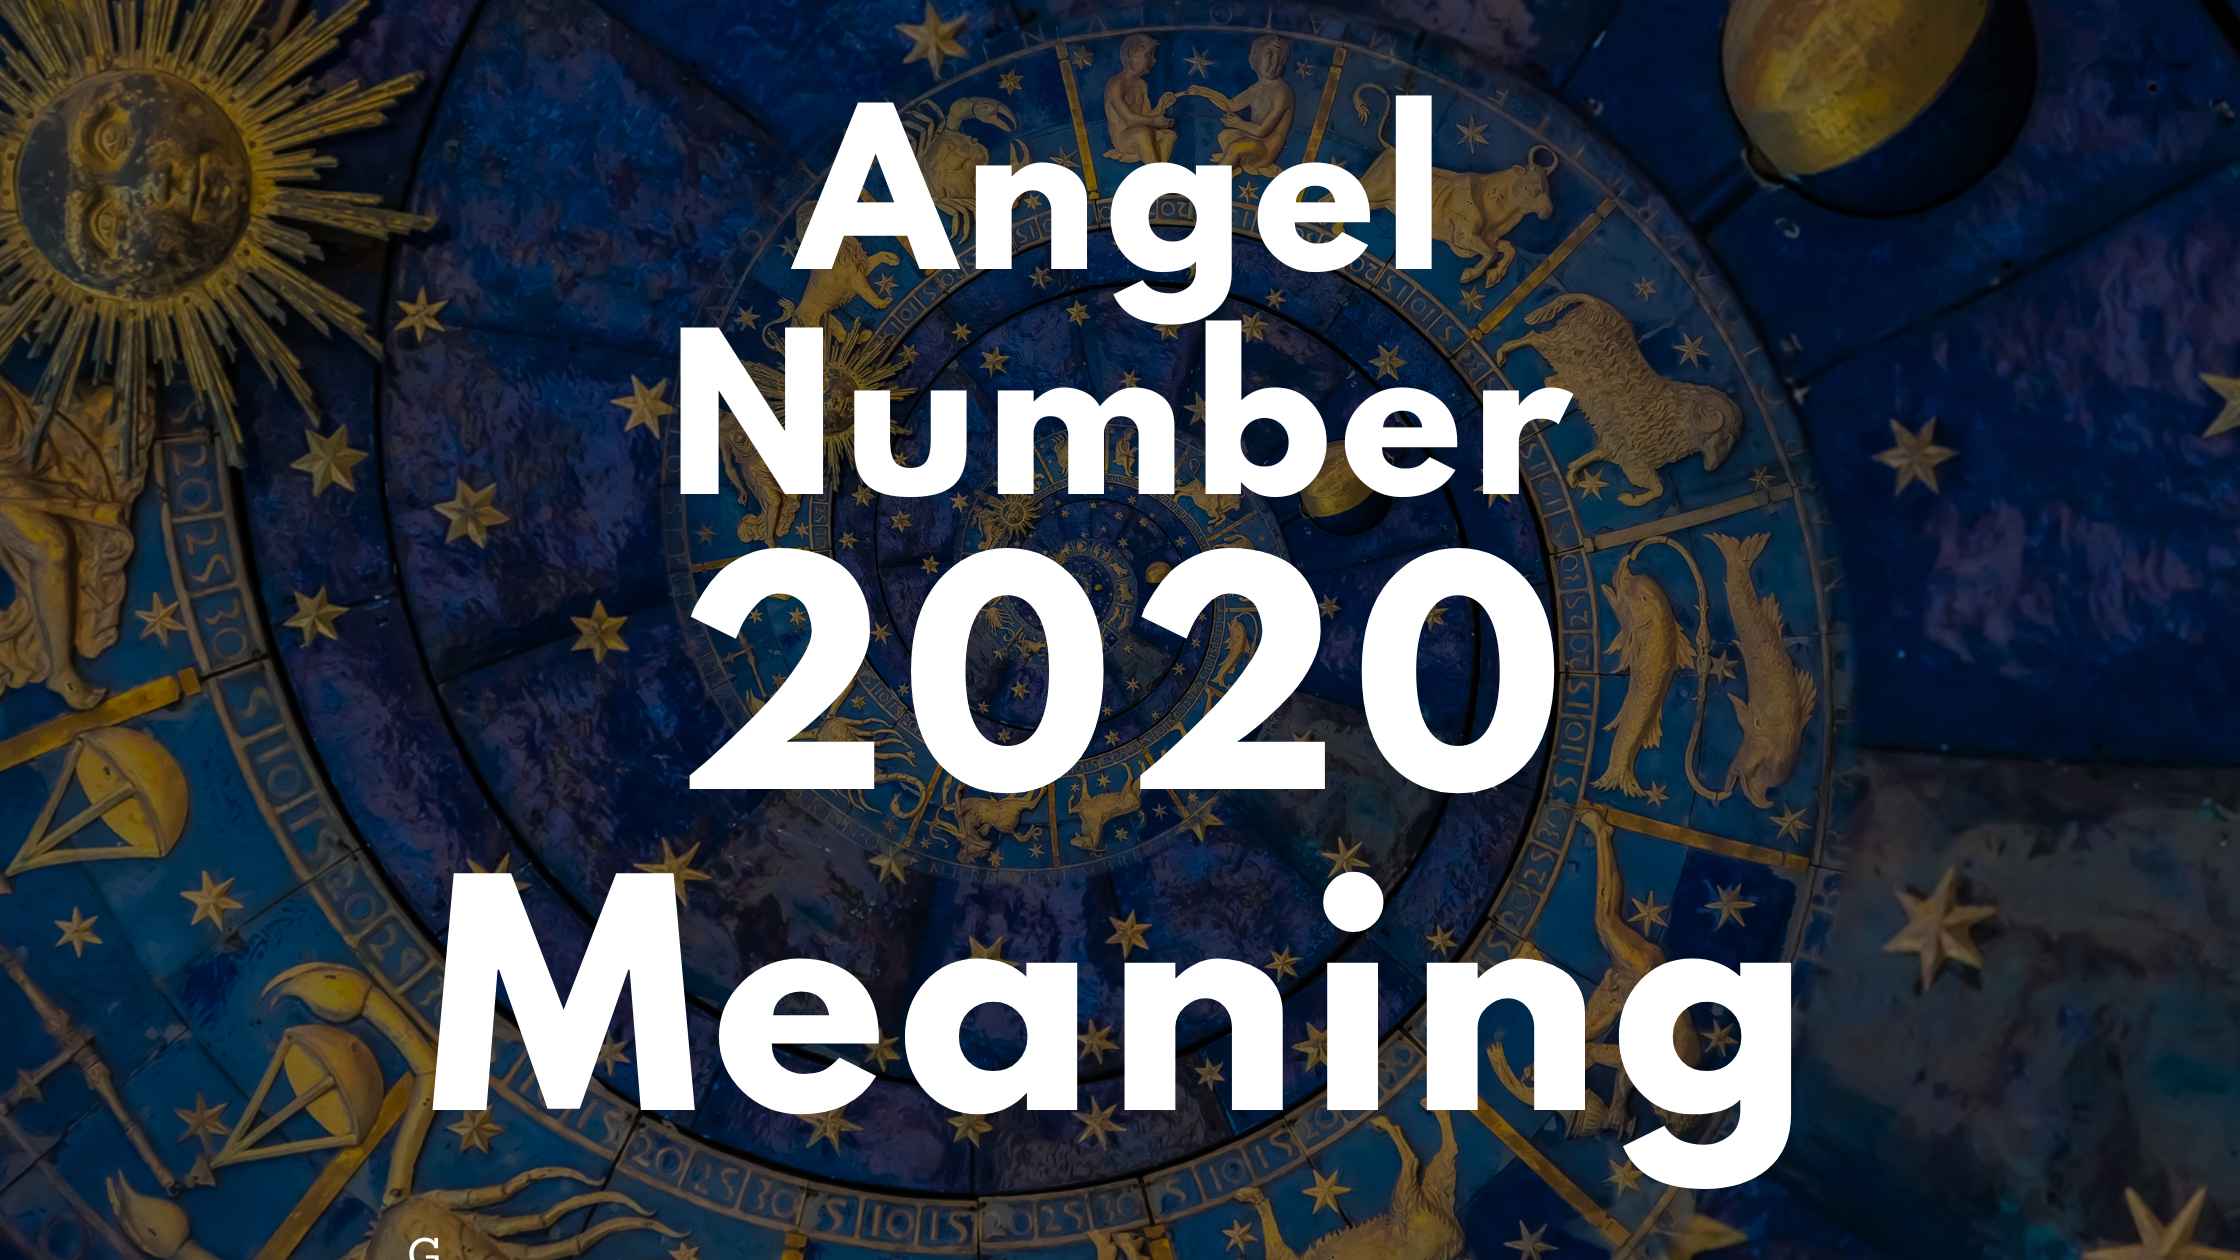 Angel Number 2020 Spiritual Meaning, Symbolism, and Significance